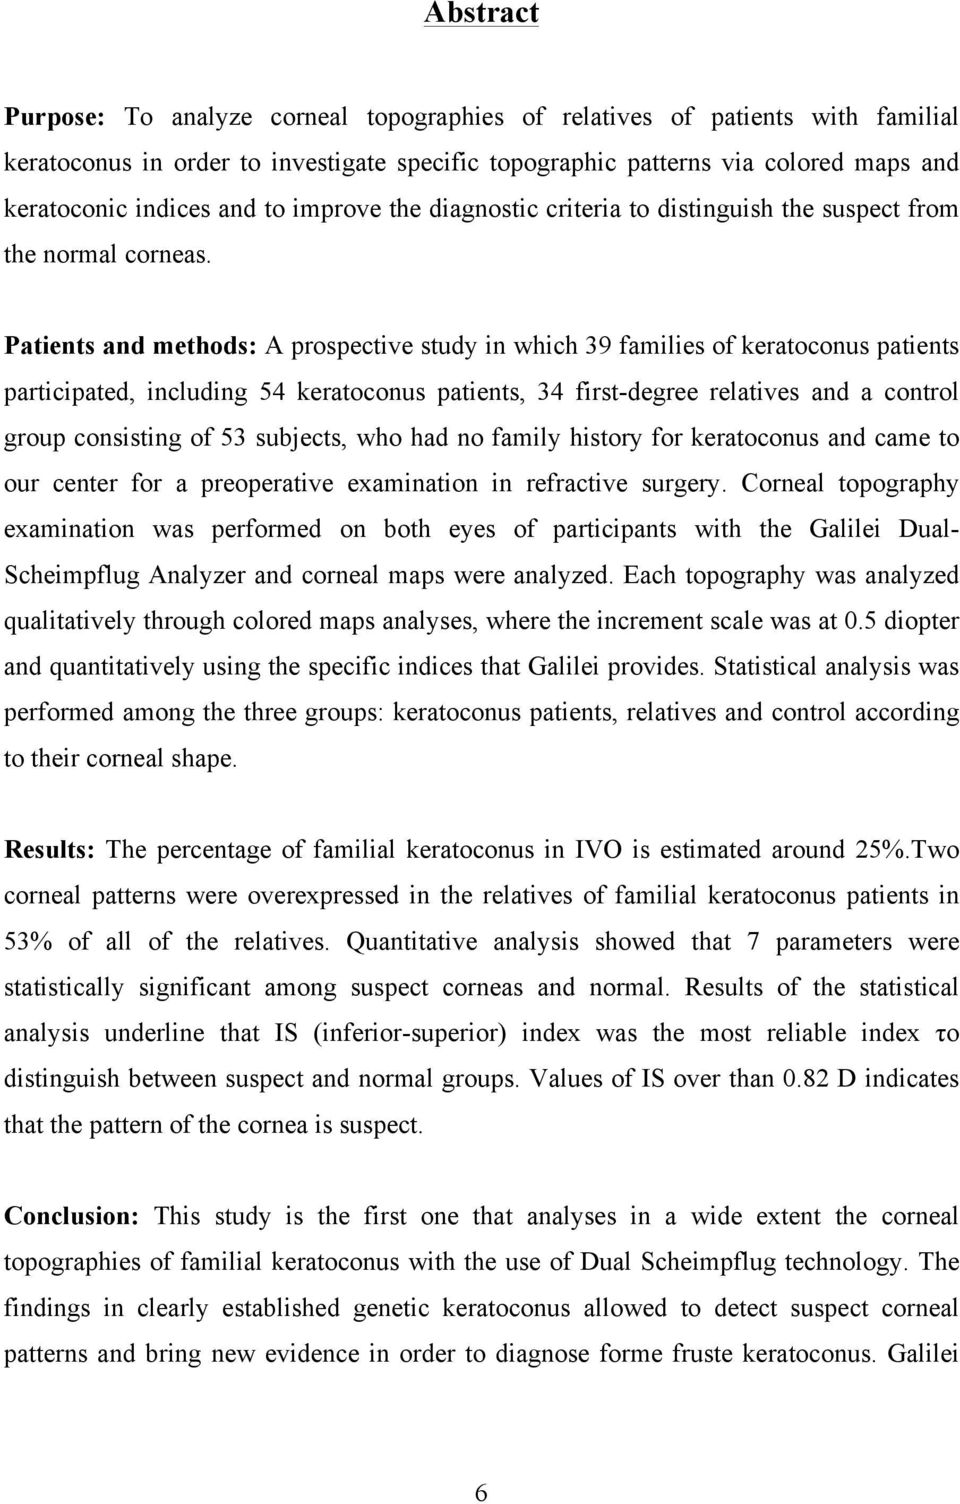 Patients and methods: A prospective study in which 39 families of keratoconus patients participated, including 54 keratoconus patients, 34 first-degree relatives and a control group consisting of 53